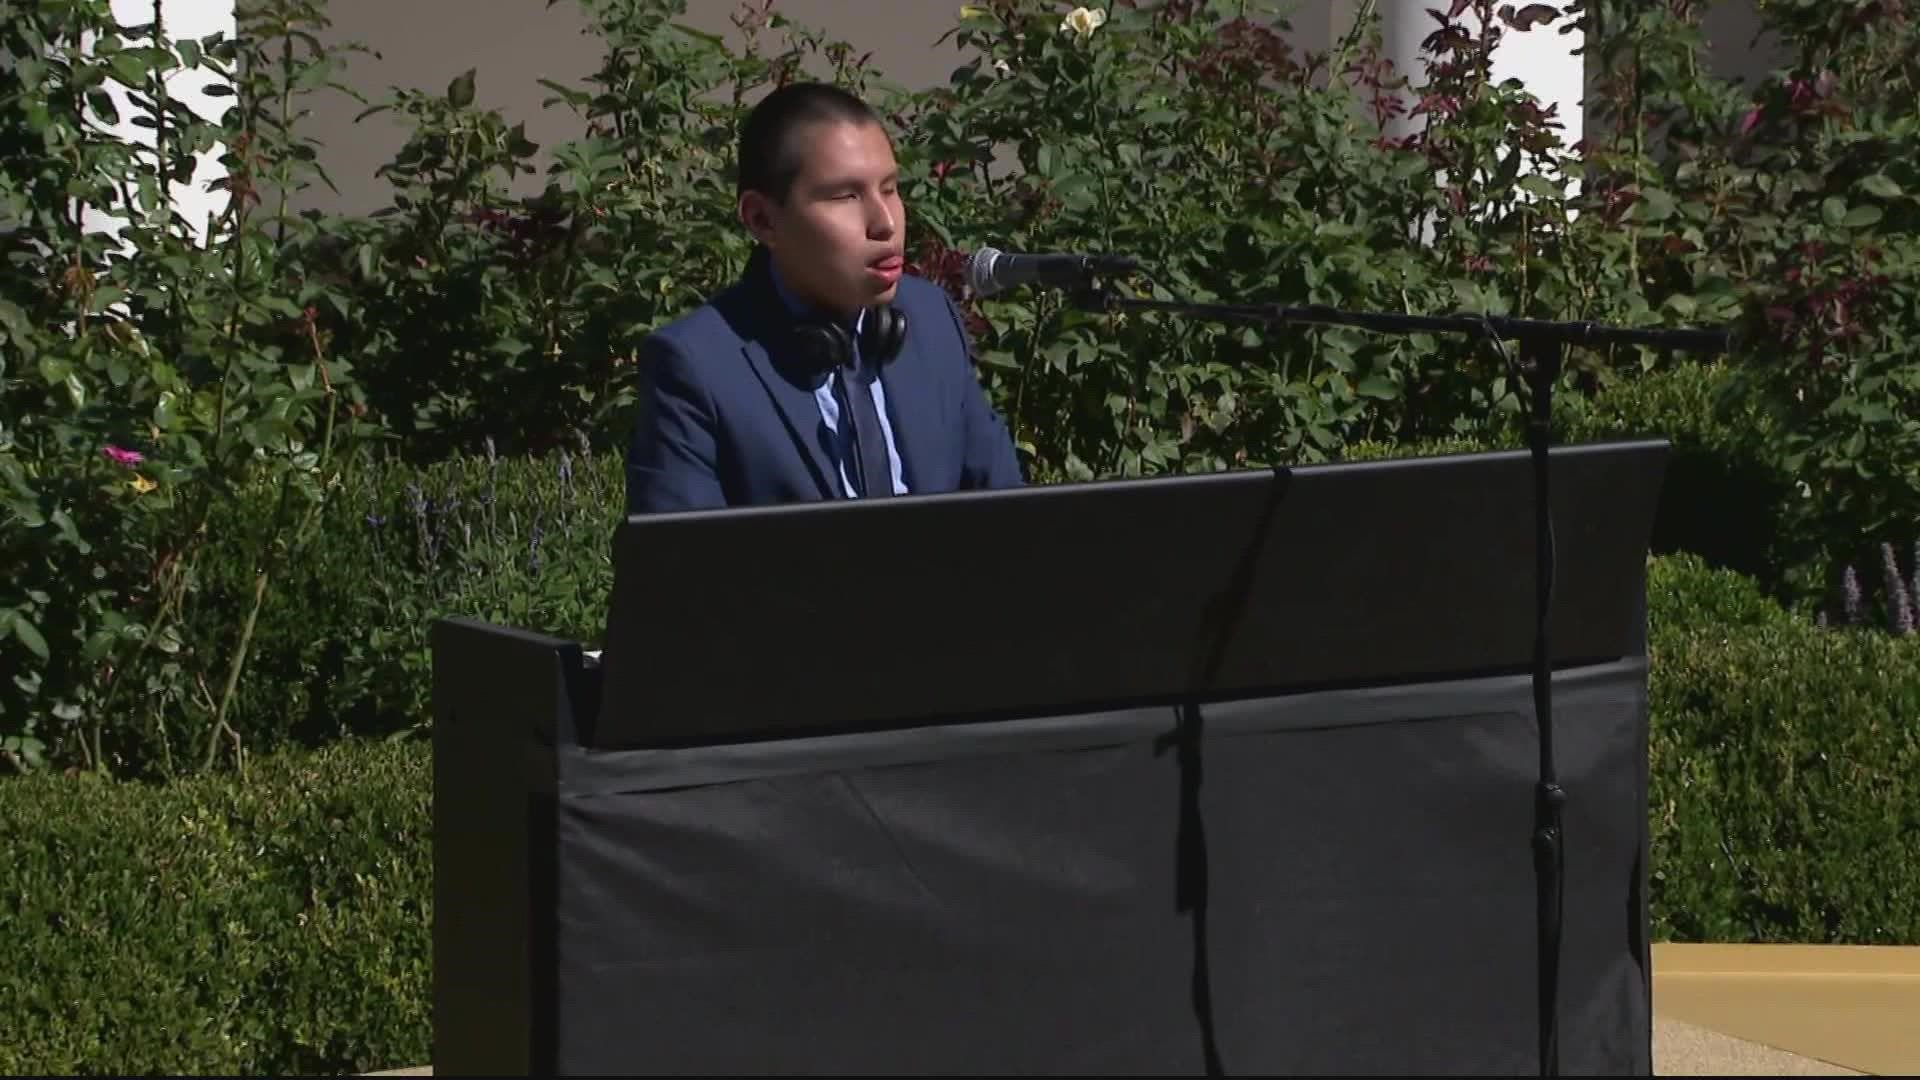 Jose Montero performed at the White House on the 32nd anniversary of the Americans with Disabilities Act.